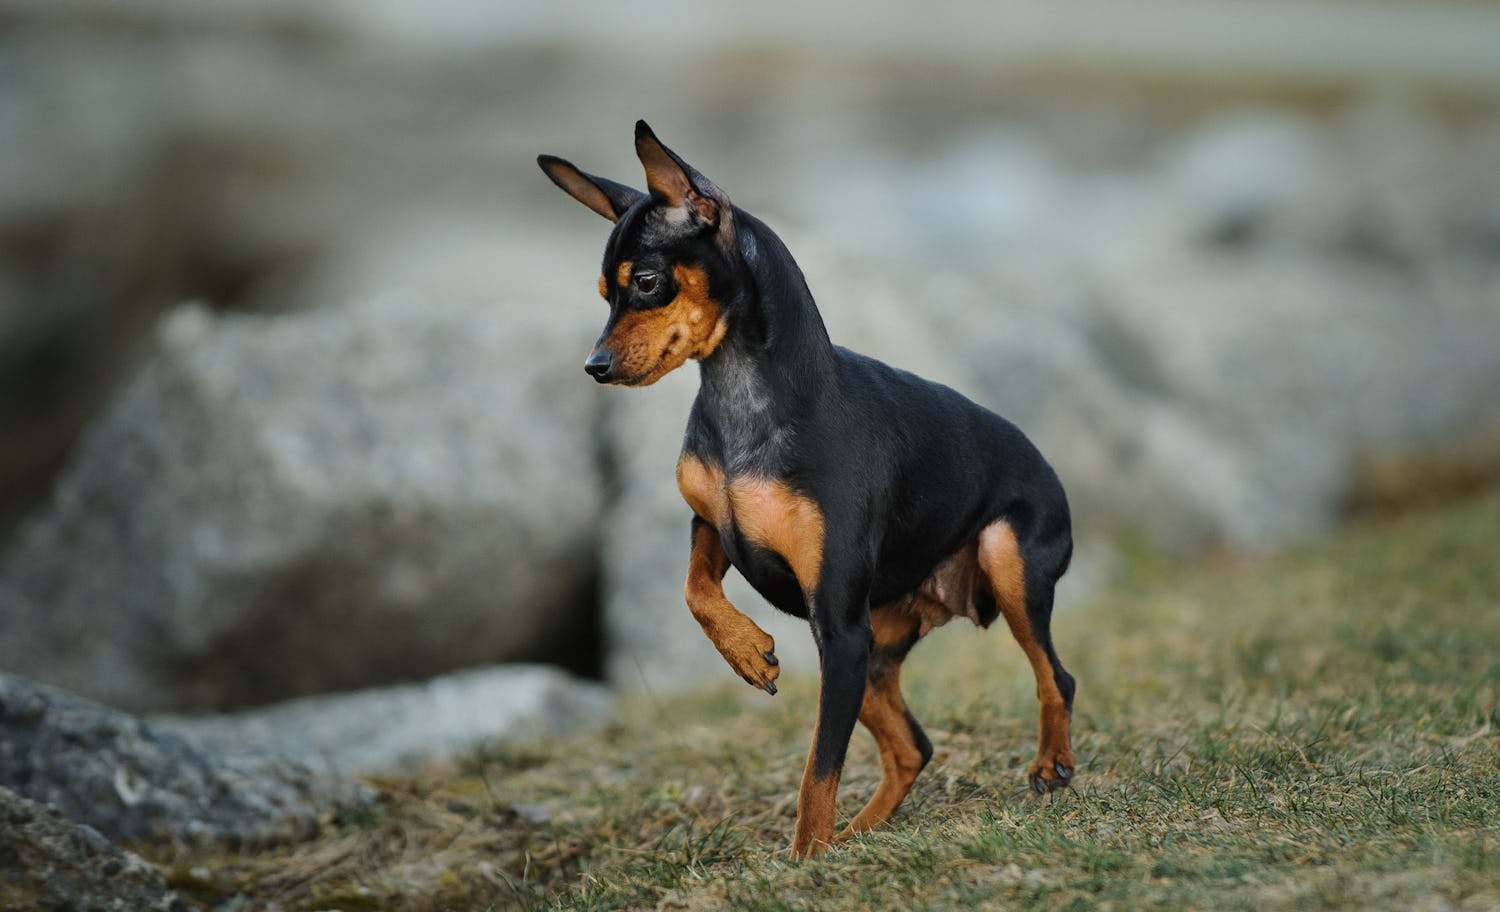 Secondary image of Miniature Pinscher dog breed